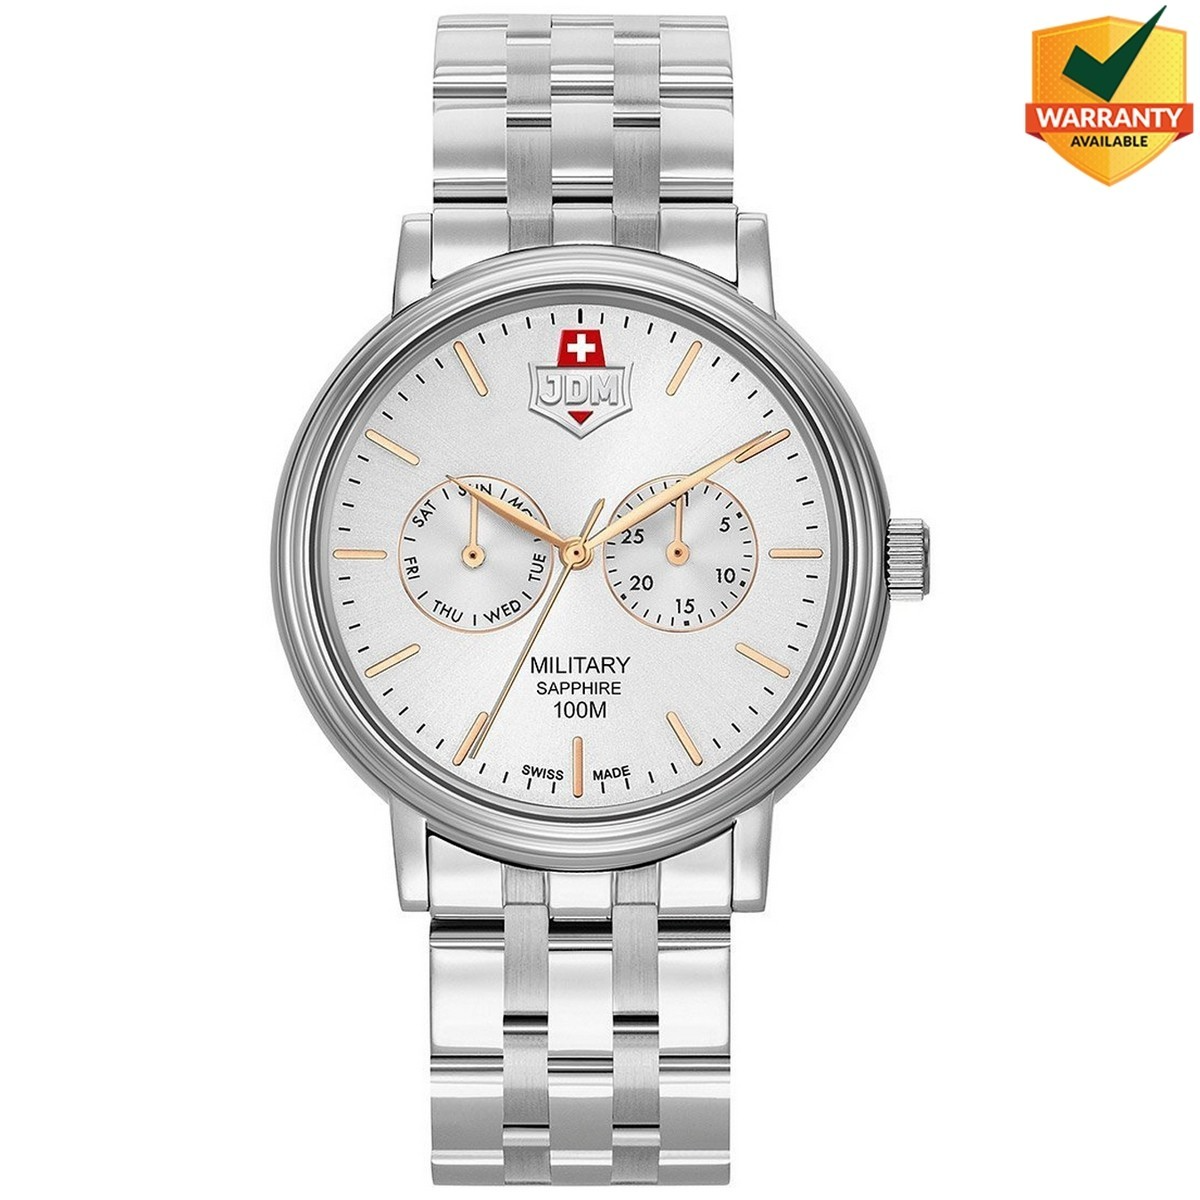 JDM Military (Jacques Du Manoir) - WG003-02 - Echo - Swiss Made - Stainless Steel Chronograph Wrist Watch for Men - 10 ATM